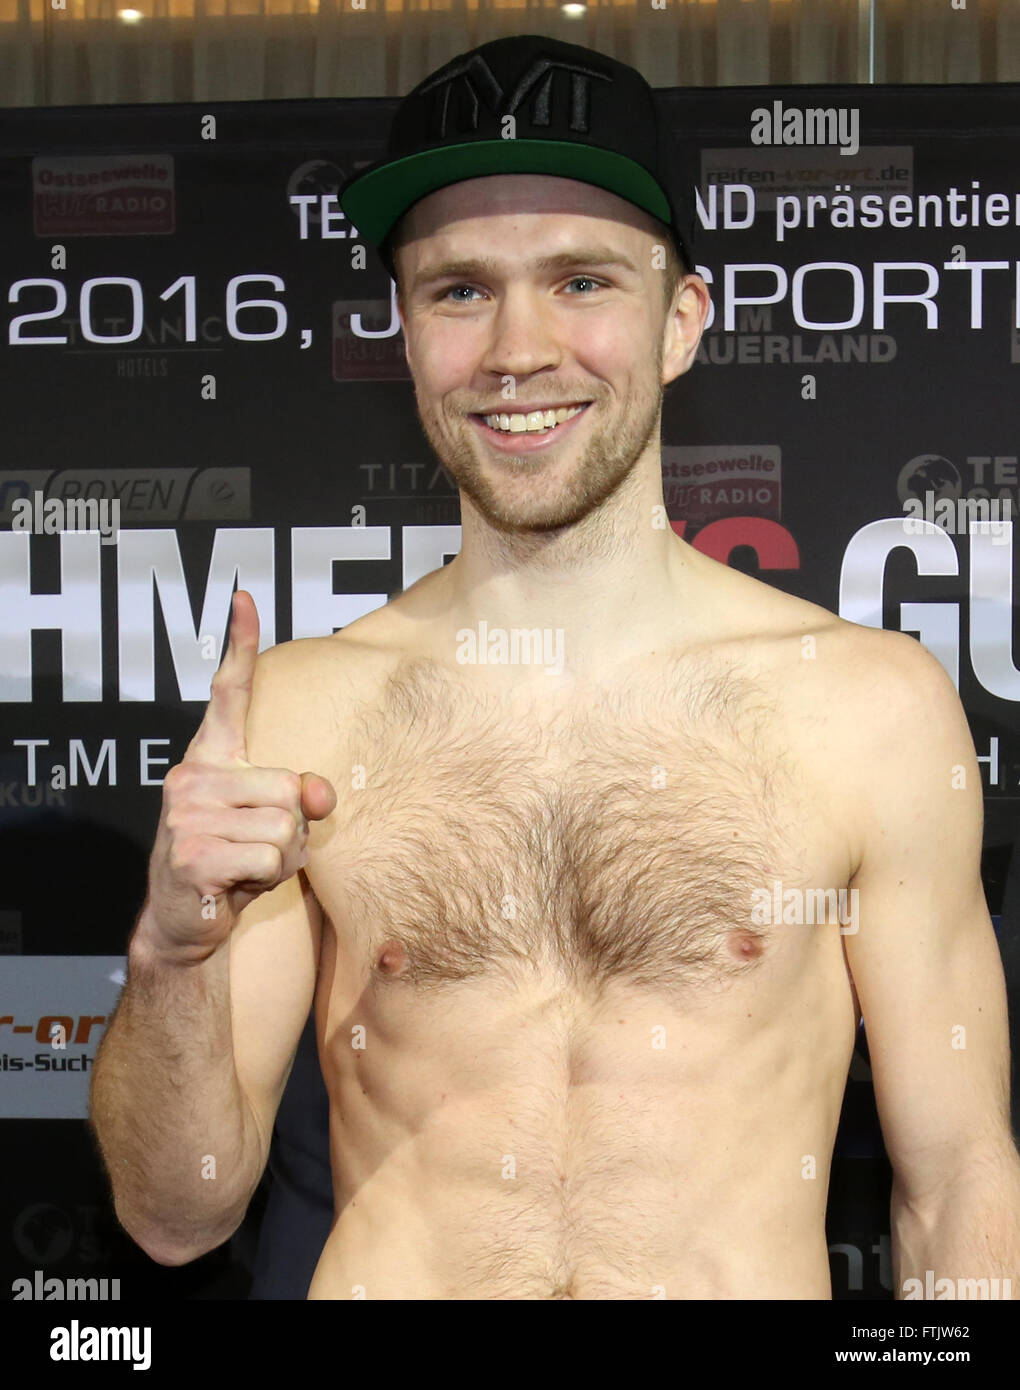 Neubrandenburg, Germany. 11th Mar, 2016. Stefan Haertel of Germany poses at  teh offical weigh in of the Boxgala in Neubrandenburg, Germany, 11 March  2016. PHOTO: BERND WÜSTNECK/DPA/Alamy Live News Stock Photo - Alamy